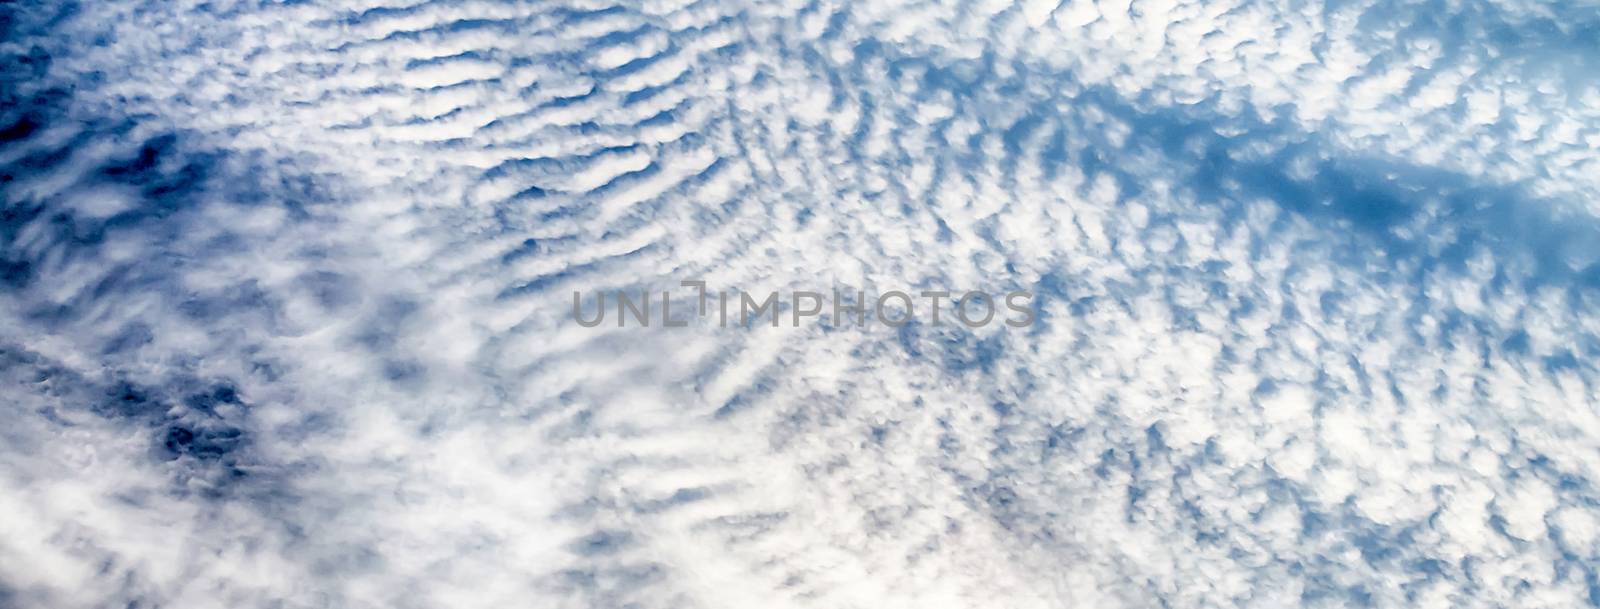 Blue Sky with Stripes Clouds Texture with copy space, may use as background